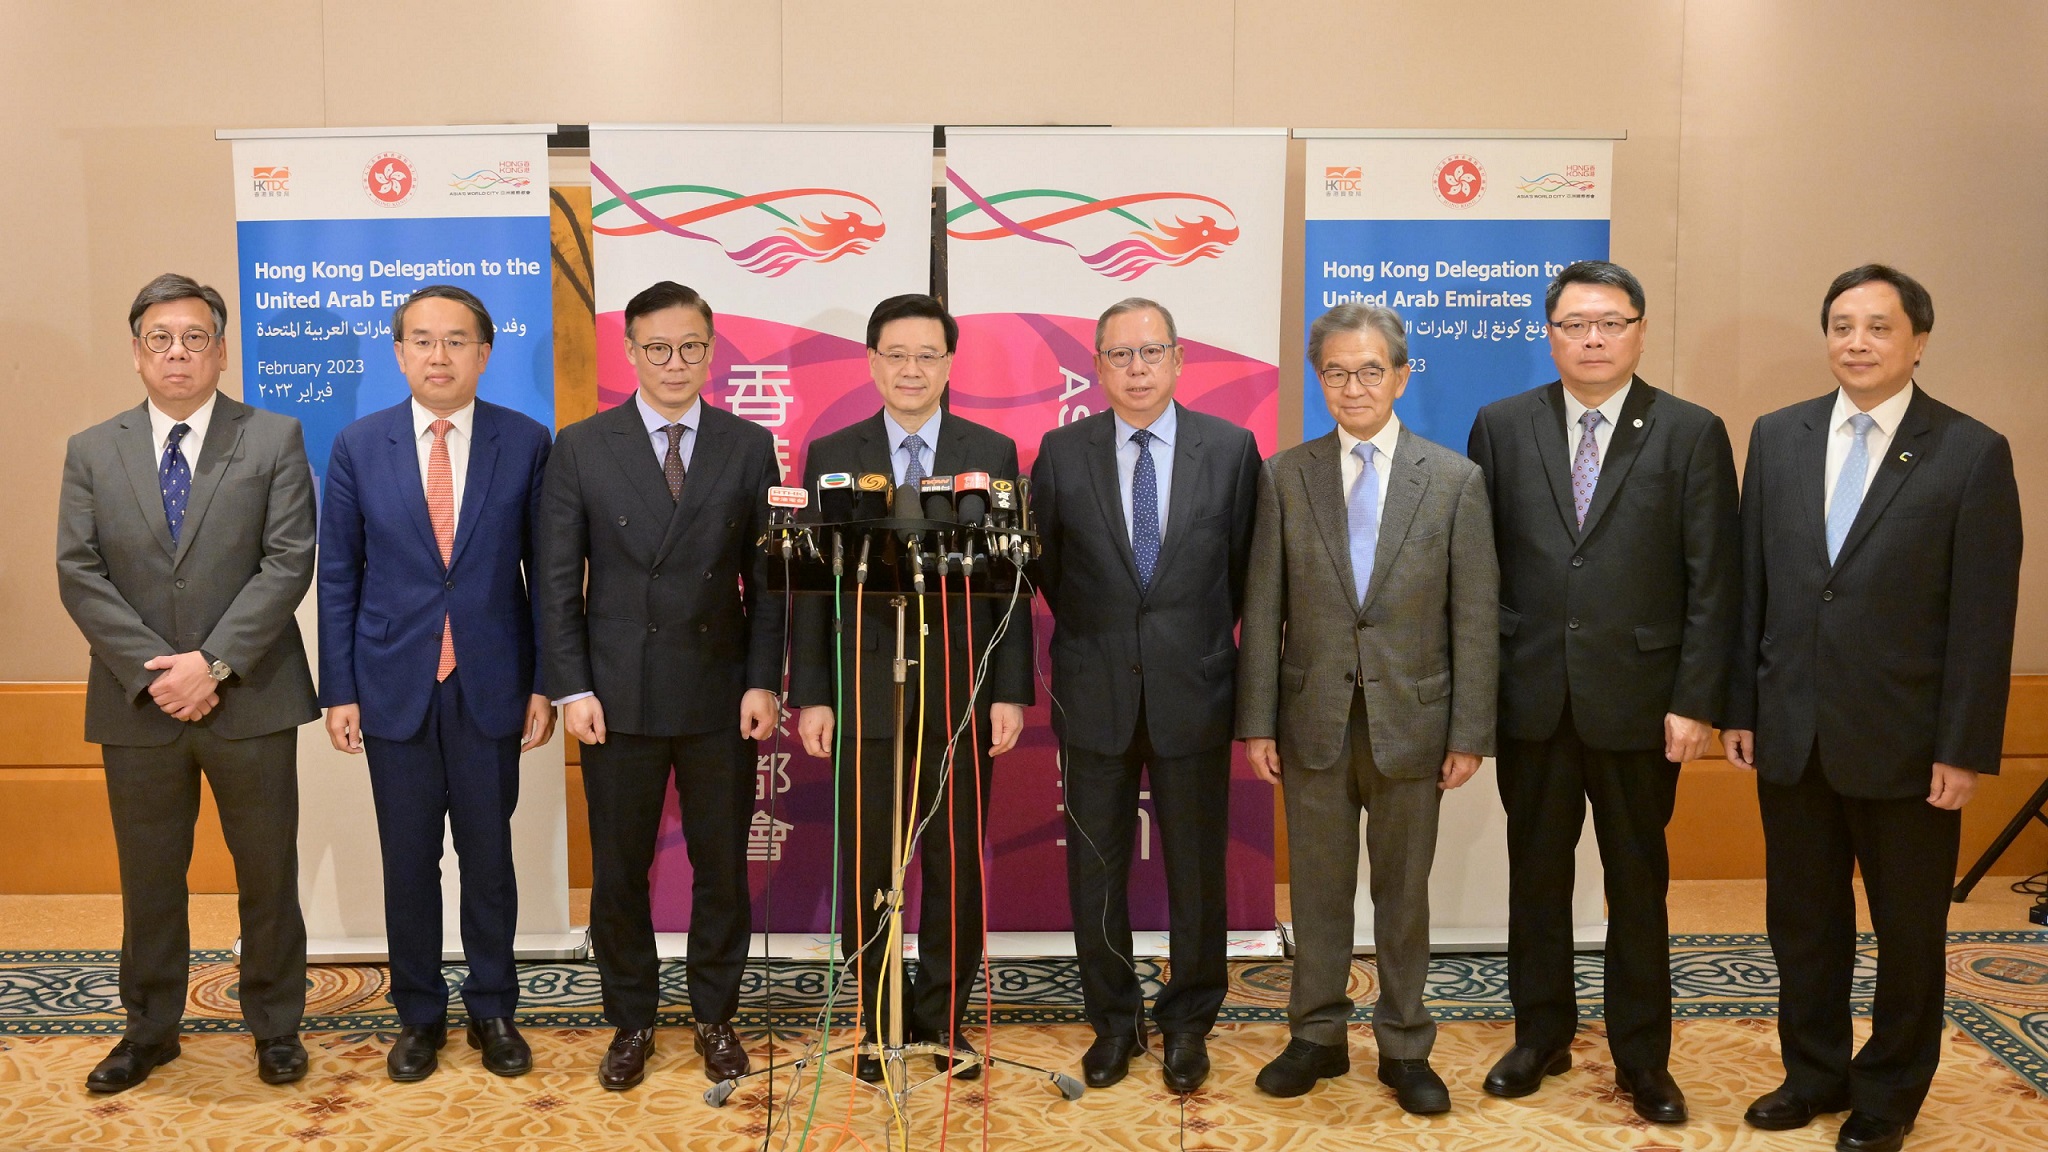 The Chief Executive, Mr John Lee (fourth left), together with the Deputy Secretary for Justice, Mr Cheung Kwok-kwan (third left); the Secretary for Financial Services and the Treasury, Mr Christopher Hui (second left); the Secretary for Commerce and Economic Development, Mr Algernon Yau (first left); the Chairman of the Hong Kong Trade Development Council, Dr Peter Lam (fourth right); the Chairman of the Airport Authority Hong Kong, Mr Jack So (third right); the Chairman of the Hong Kong Science and Technology Parks Corporation and the Chairman of the Federation of Hong Kong Industries, Dr Sunny Chai (second right); and the Chairman of the Hong Kong Cyberport Management Company Limited, Mr Simon Chan (first right), met the media in Dubai, the United Arab Emirates, on 10 February 2023 (Dubai Time). 